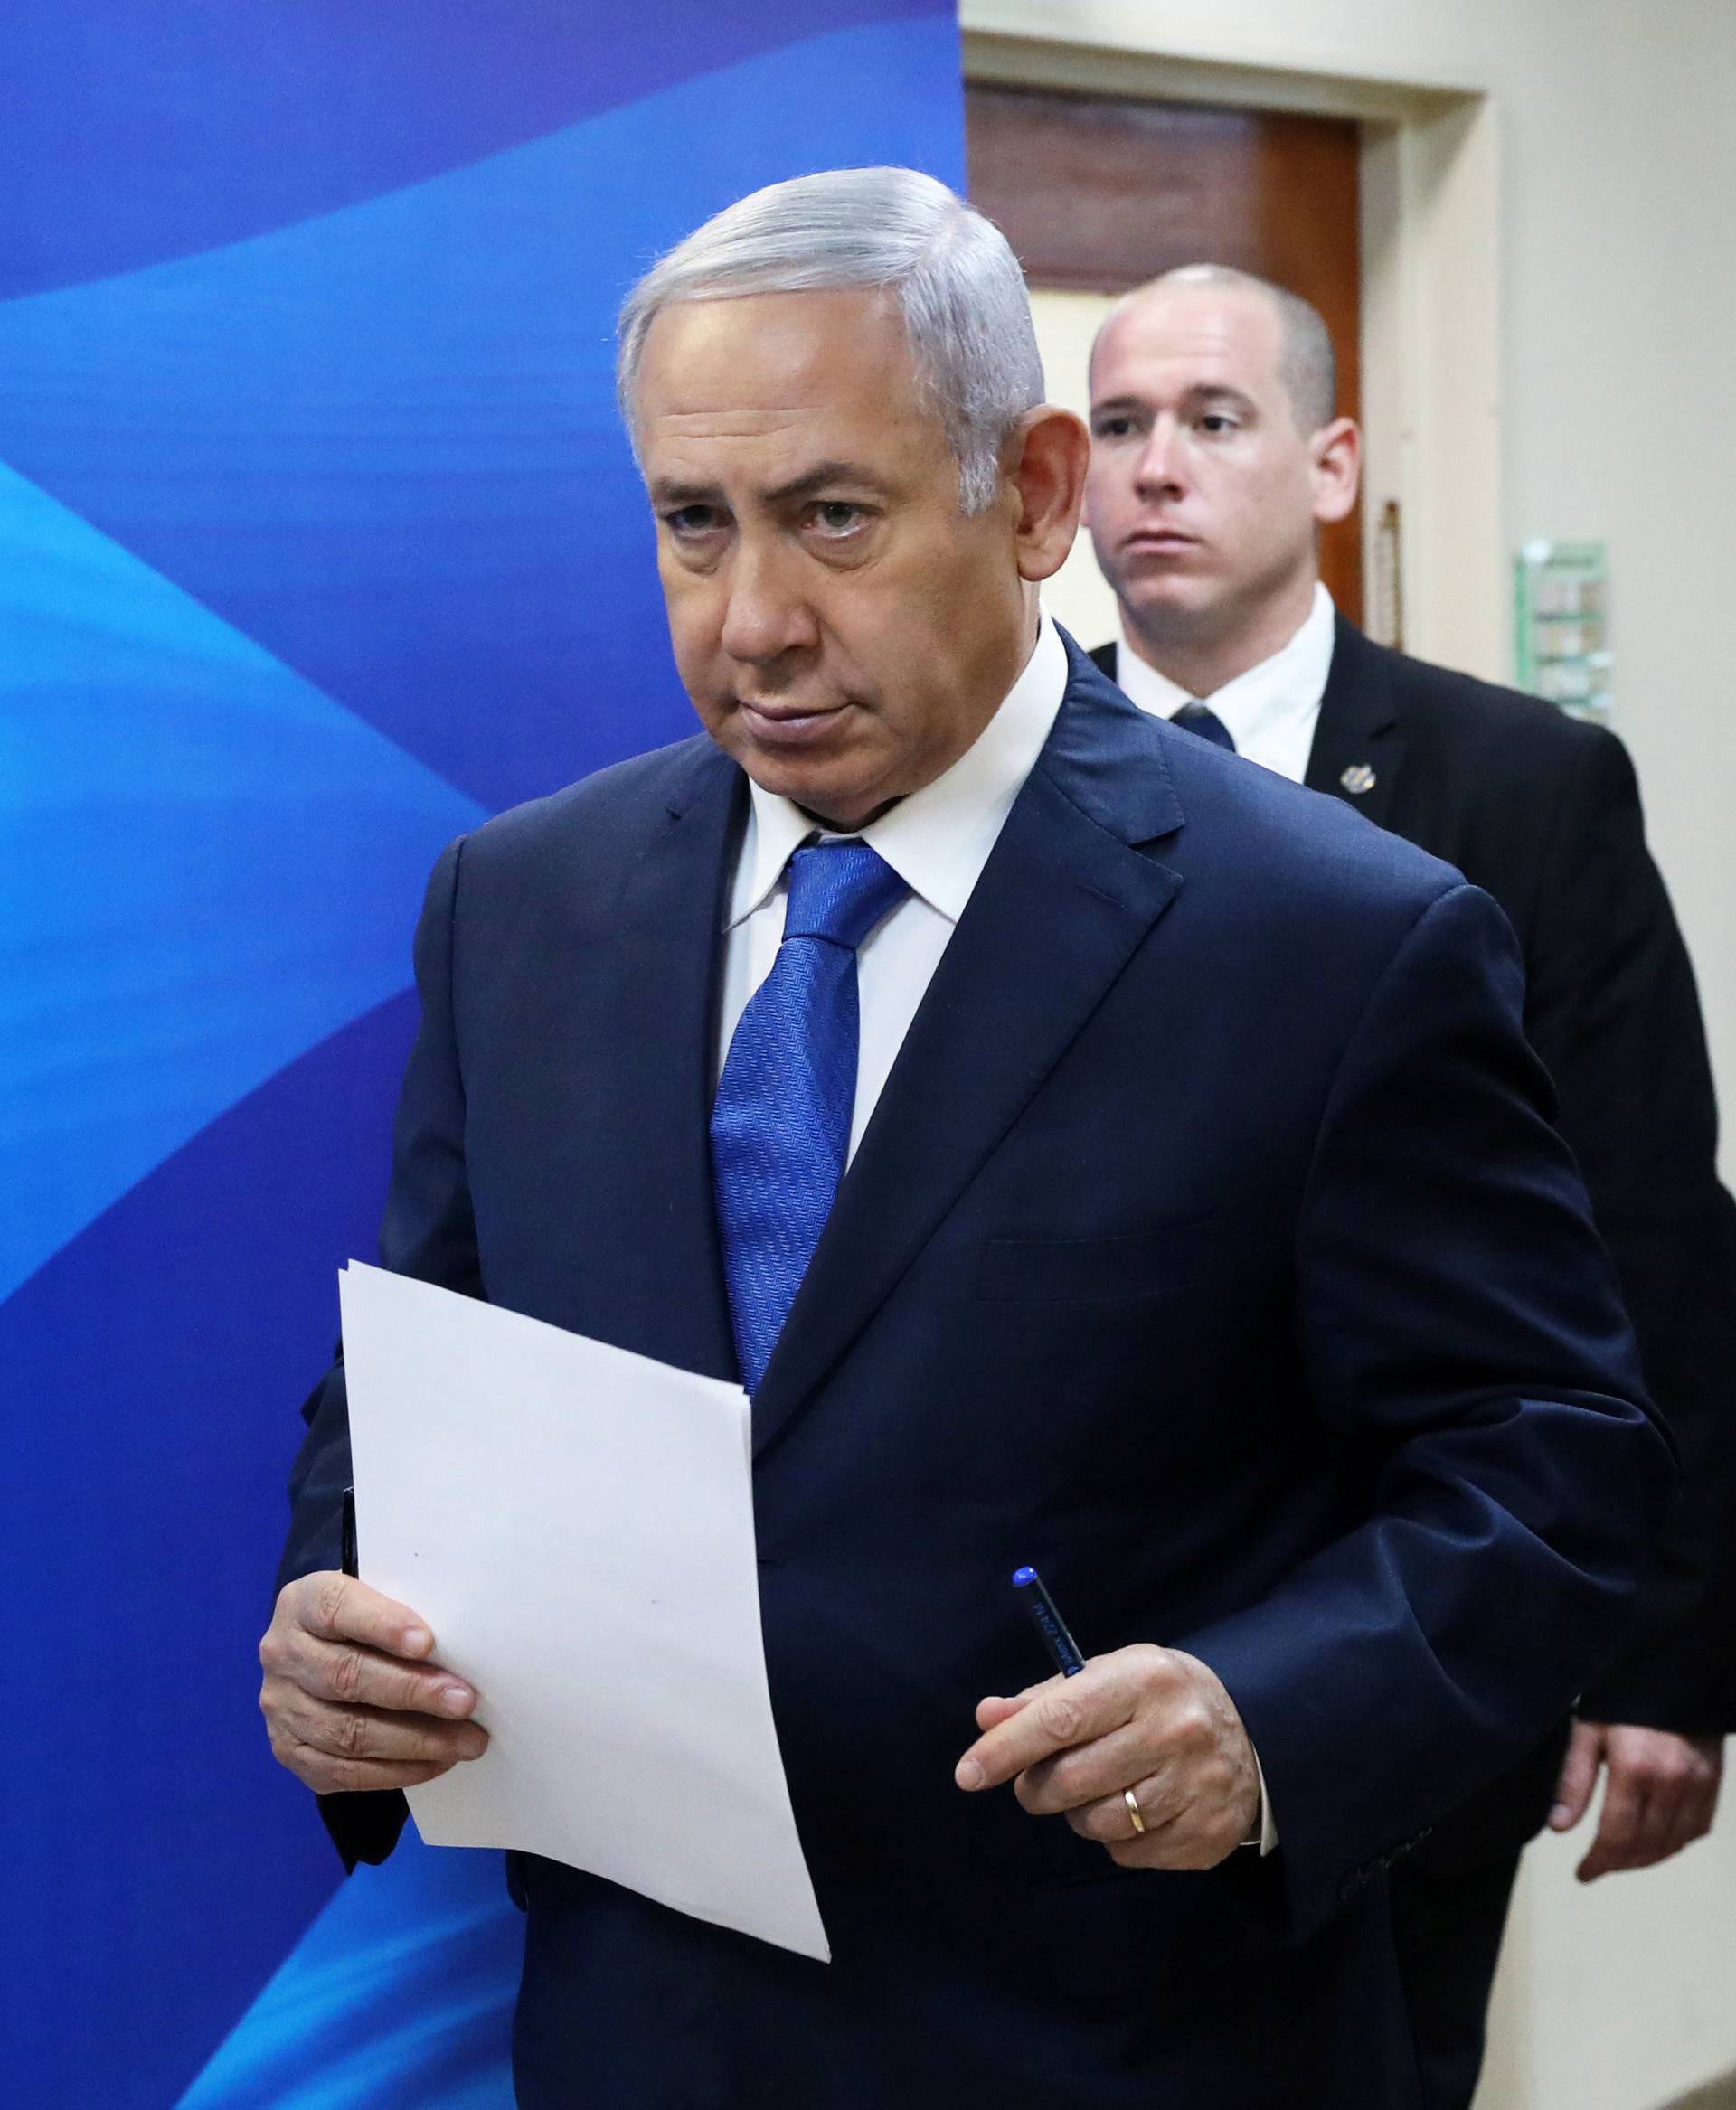 Israeli Prime Minister Benjamin Netanyahu attends the weekly cabinet meeting at his office in Jerusalem